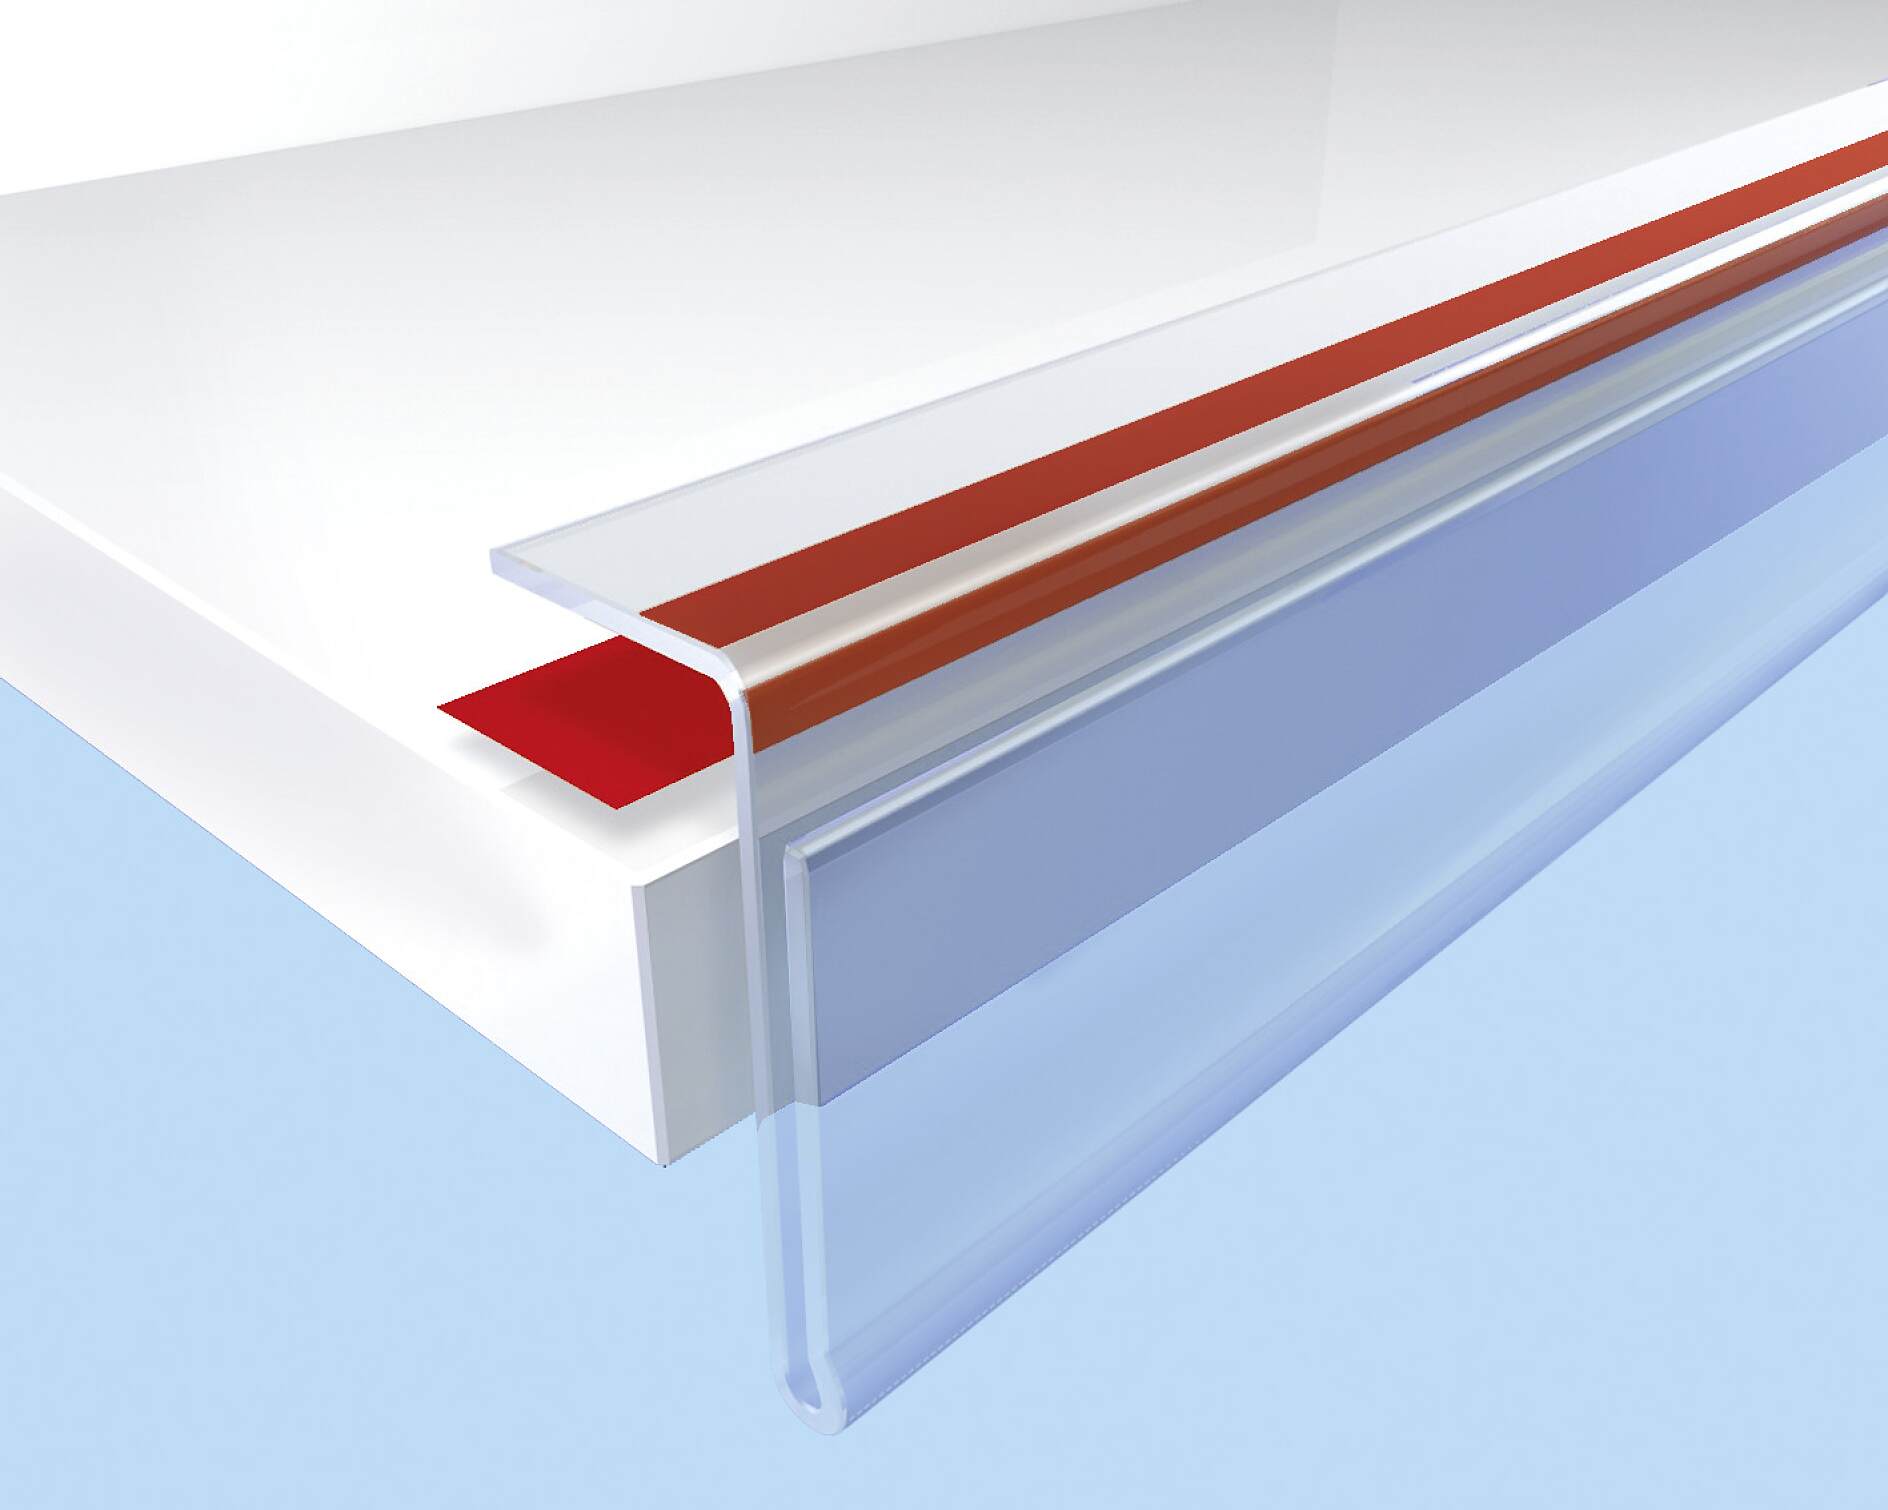 Adhesive Tape for Trims & Profiles on Buildings & Furnitures